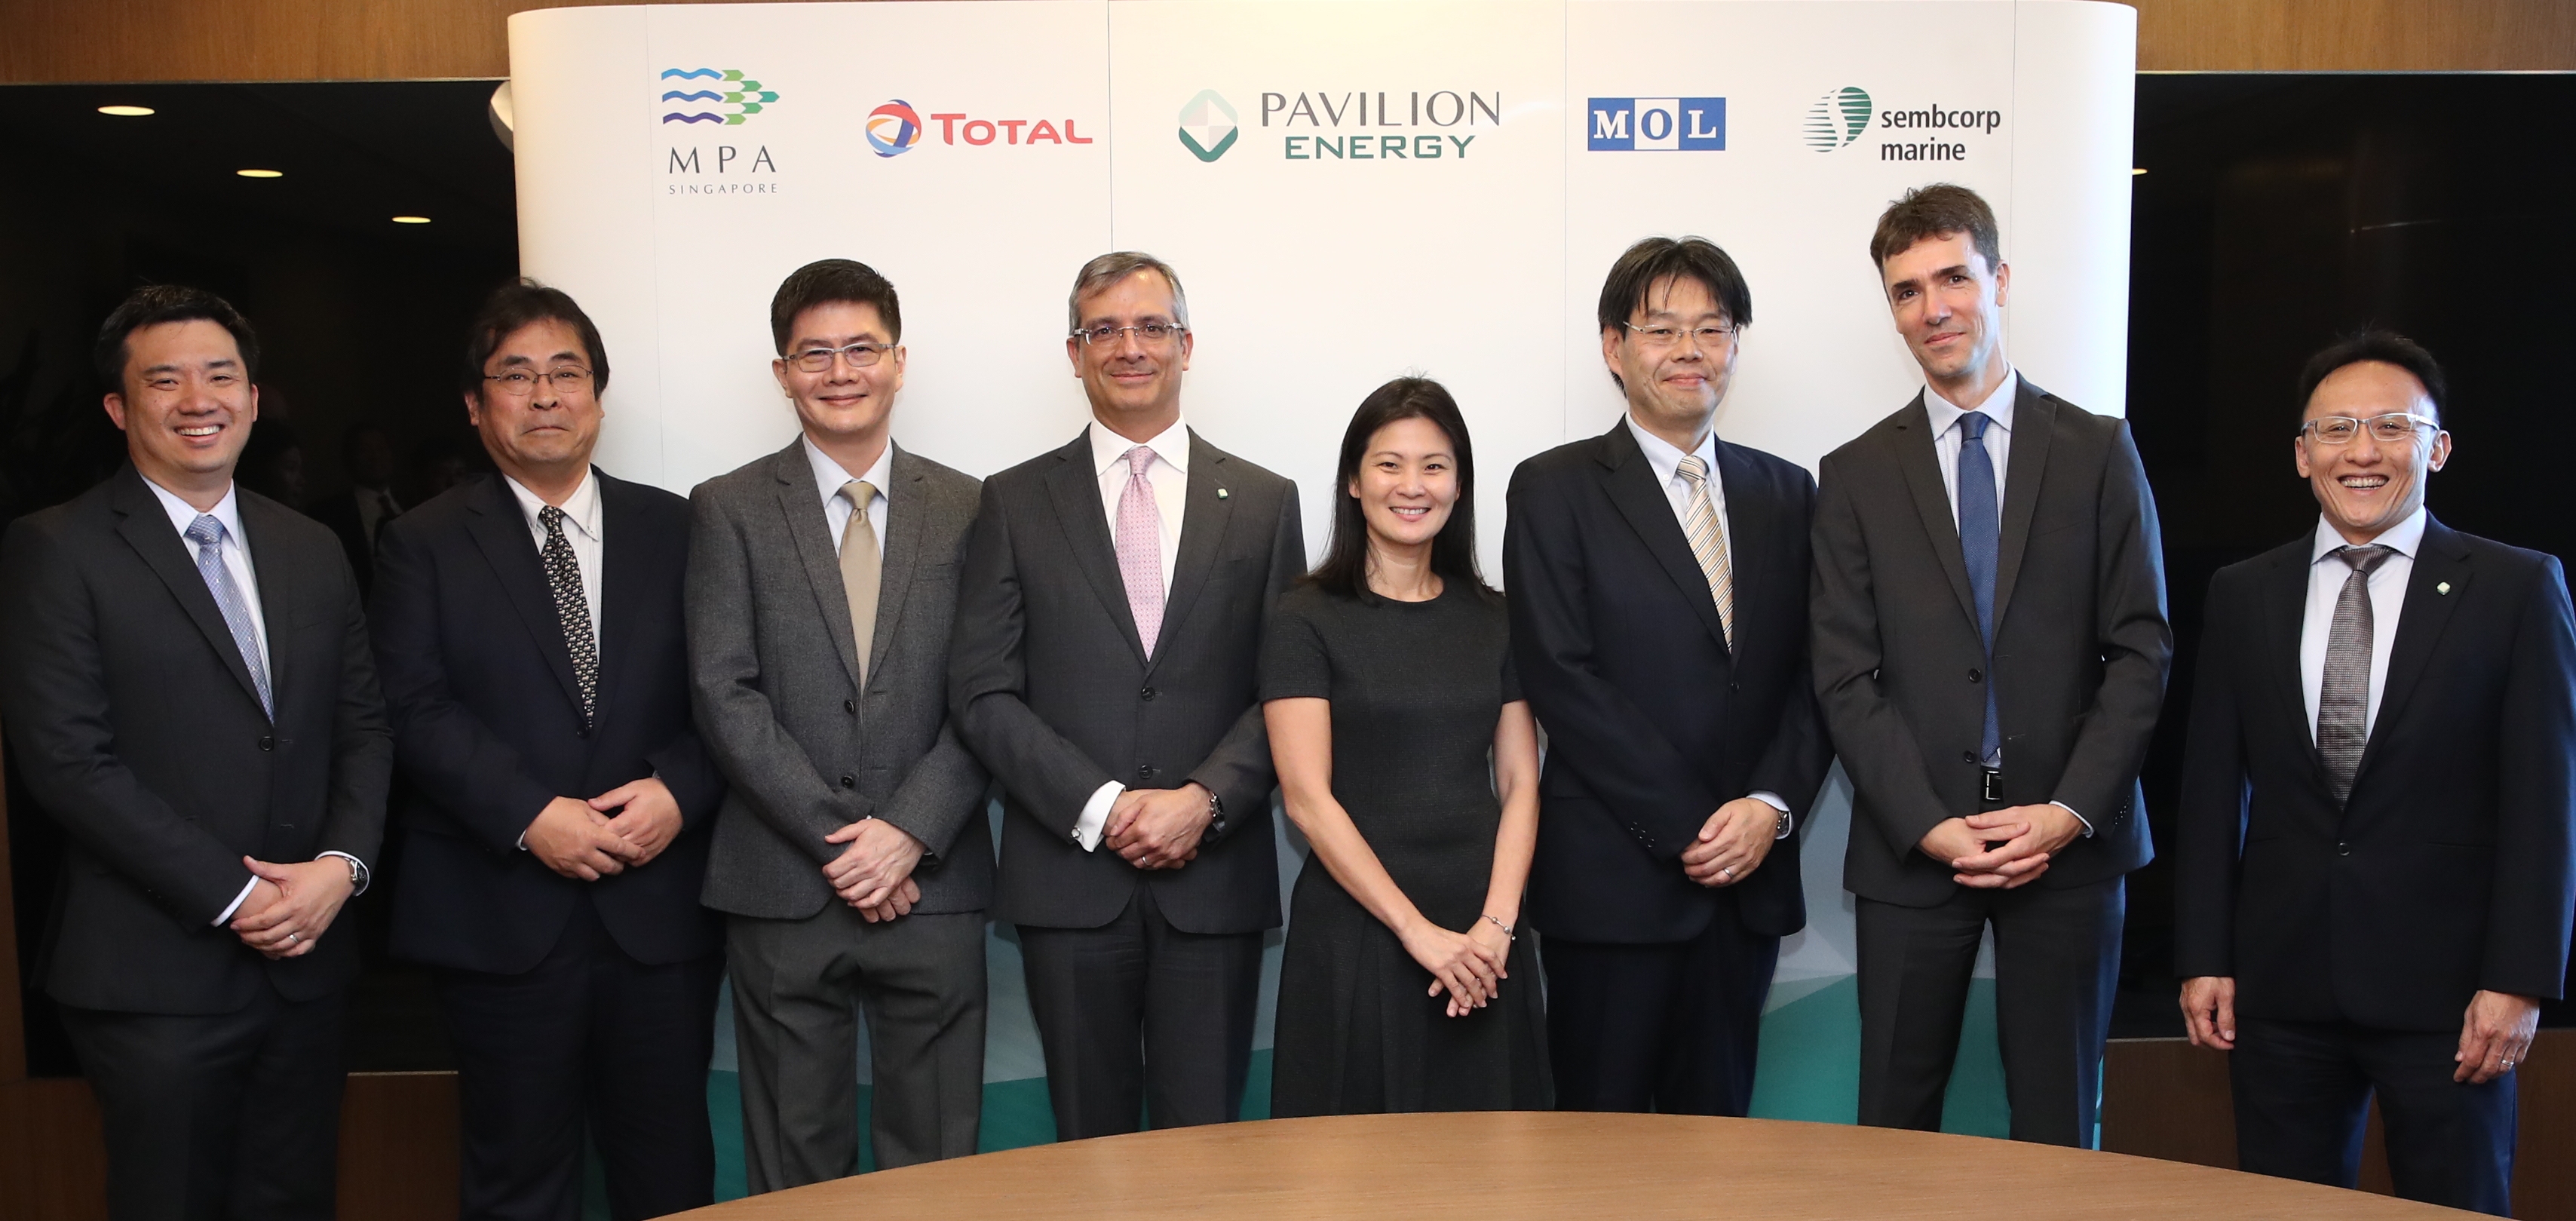 Above: "(from L to R) Mr Desmond Chong, GM of Sinanju; Mr Soichiro Kambe, Deputy GM of Mitsui; Mr Tan Heng Jack, Head of Specialised Shipbuilding of Sembcorp Marine; Mr Frédéric H. Barnaud, Group CEO of Pavilion Energy; Ms Quah Ley Hoon, Chief Executive of Maritime & Port Authority of Singapore; Mr Michihiko Nakano, GM of Bunker Business Office of MOL; Mr Jérôme Leprince-Ringuet, MD of Total Marine Fuels; and Mr Alan Heng, EVP of Pavilion Energy Singapore"